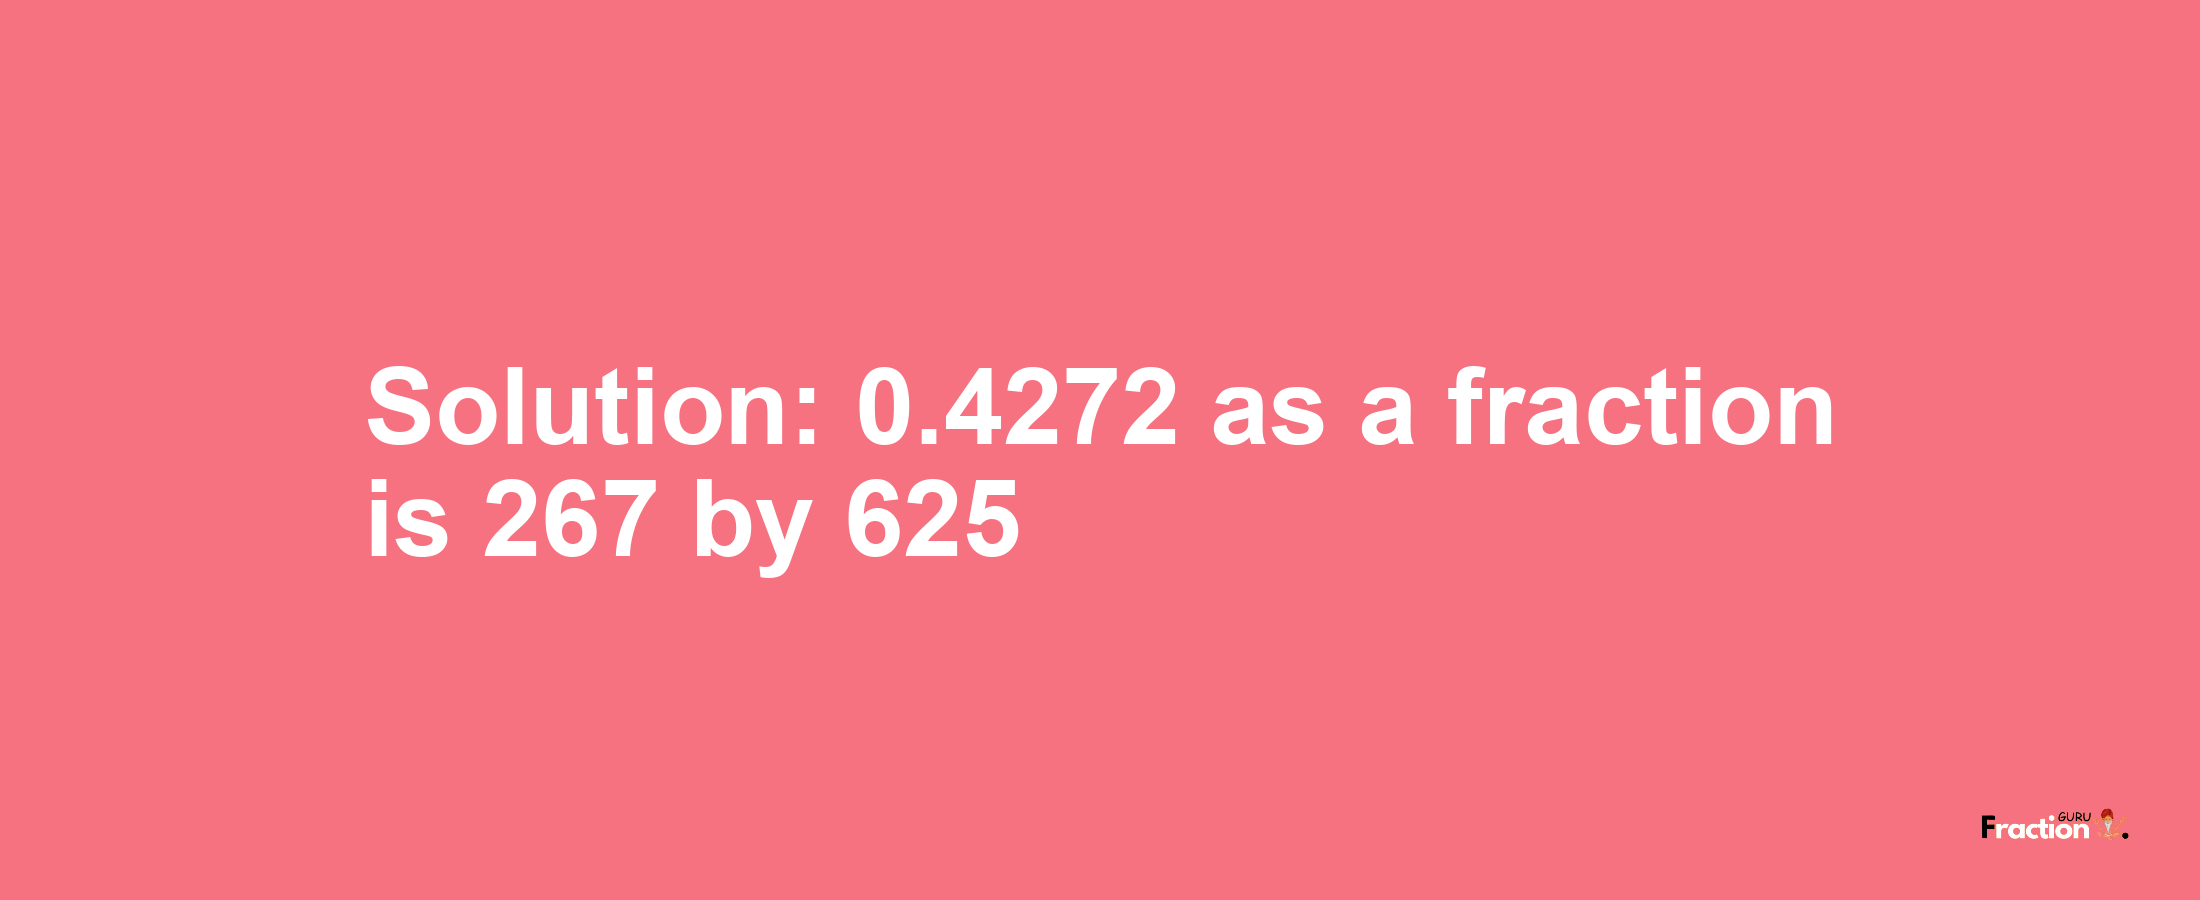 Solution:0.4272 as a fraction is 267/625